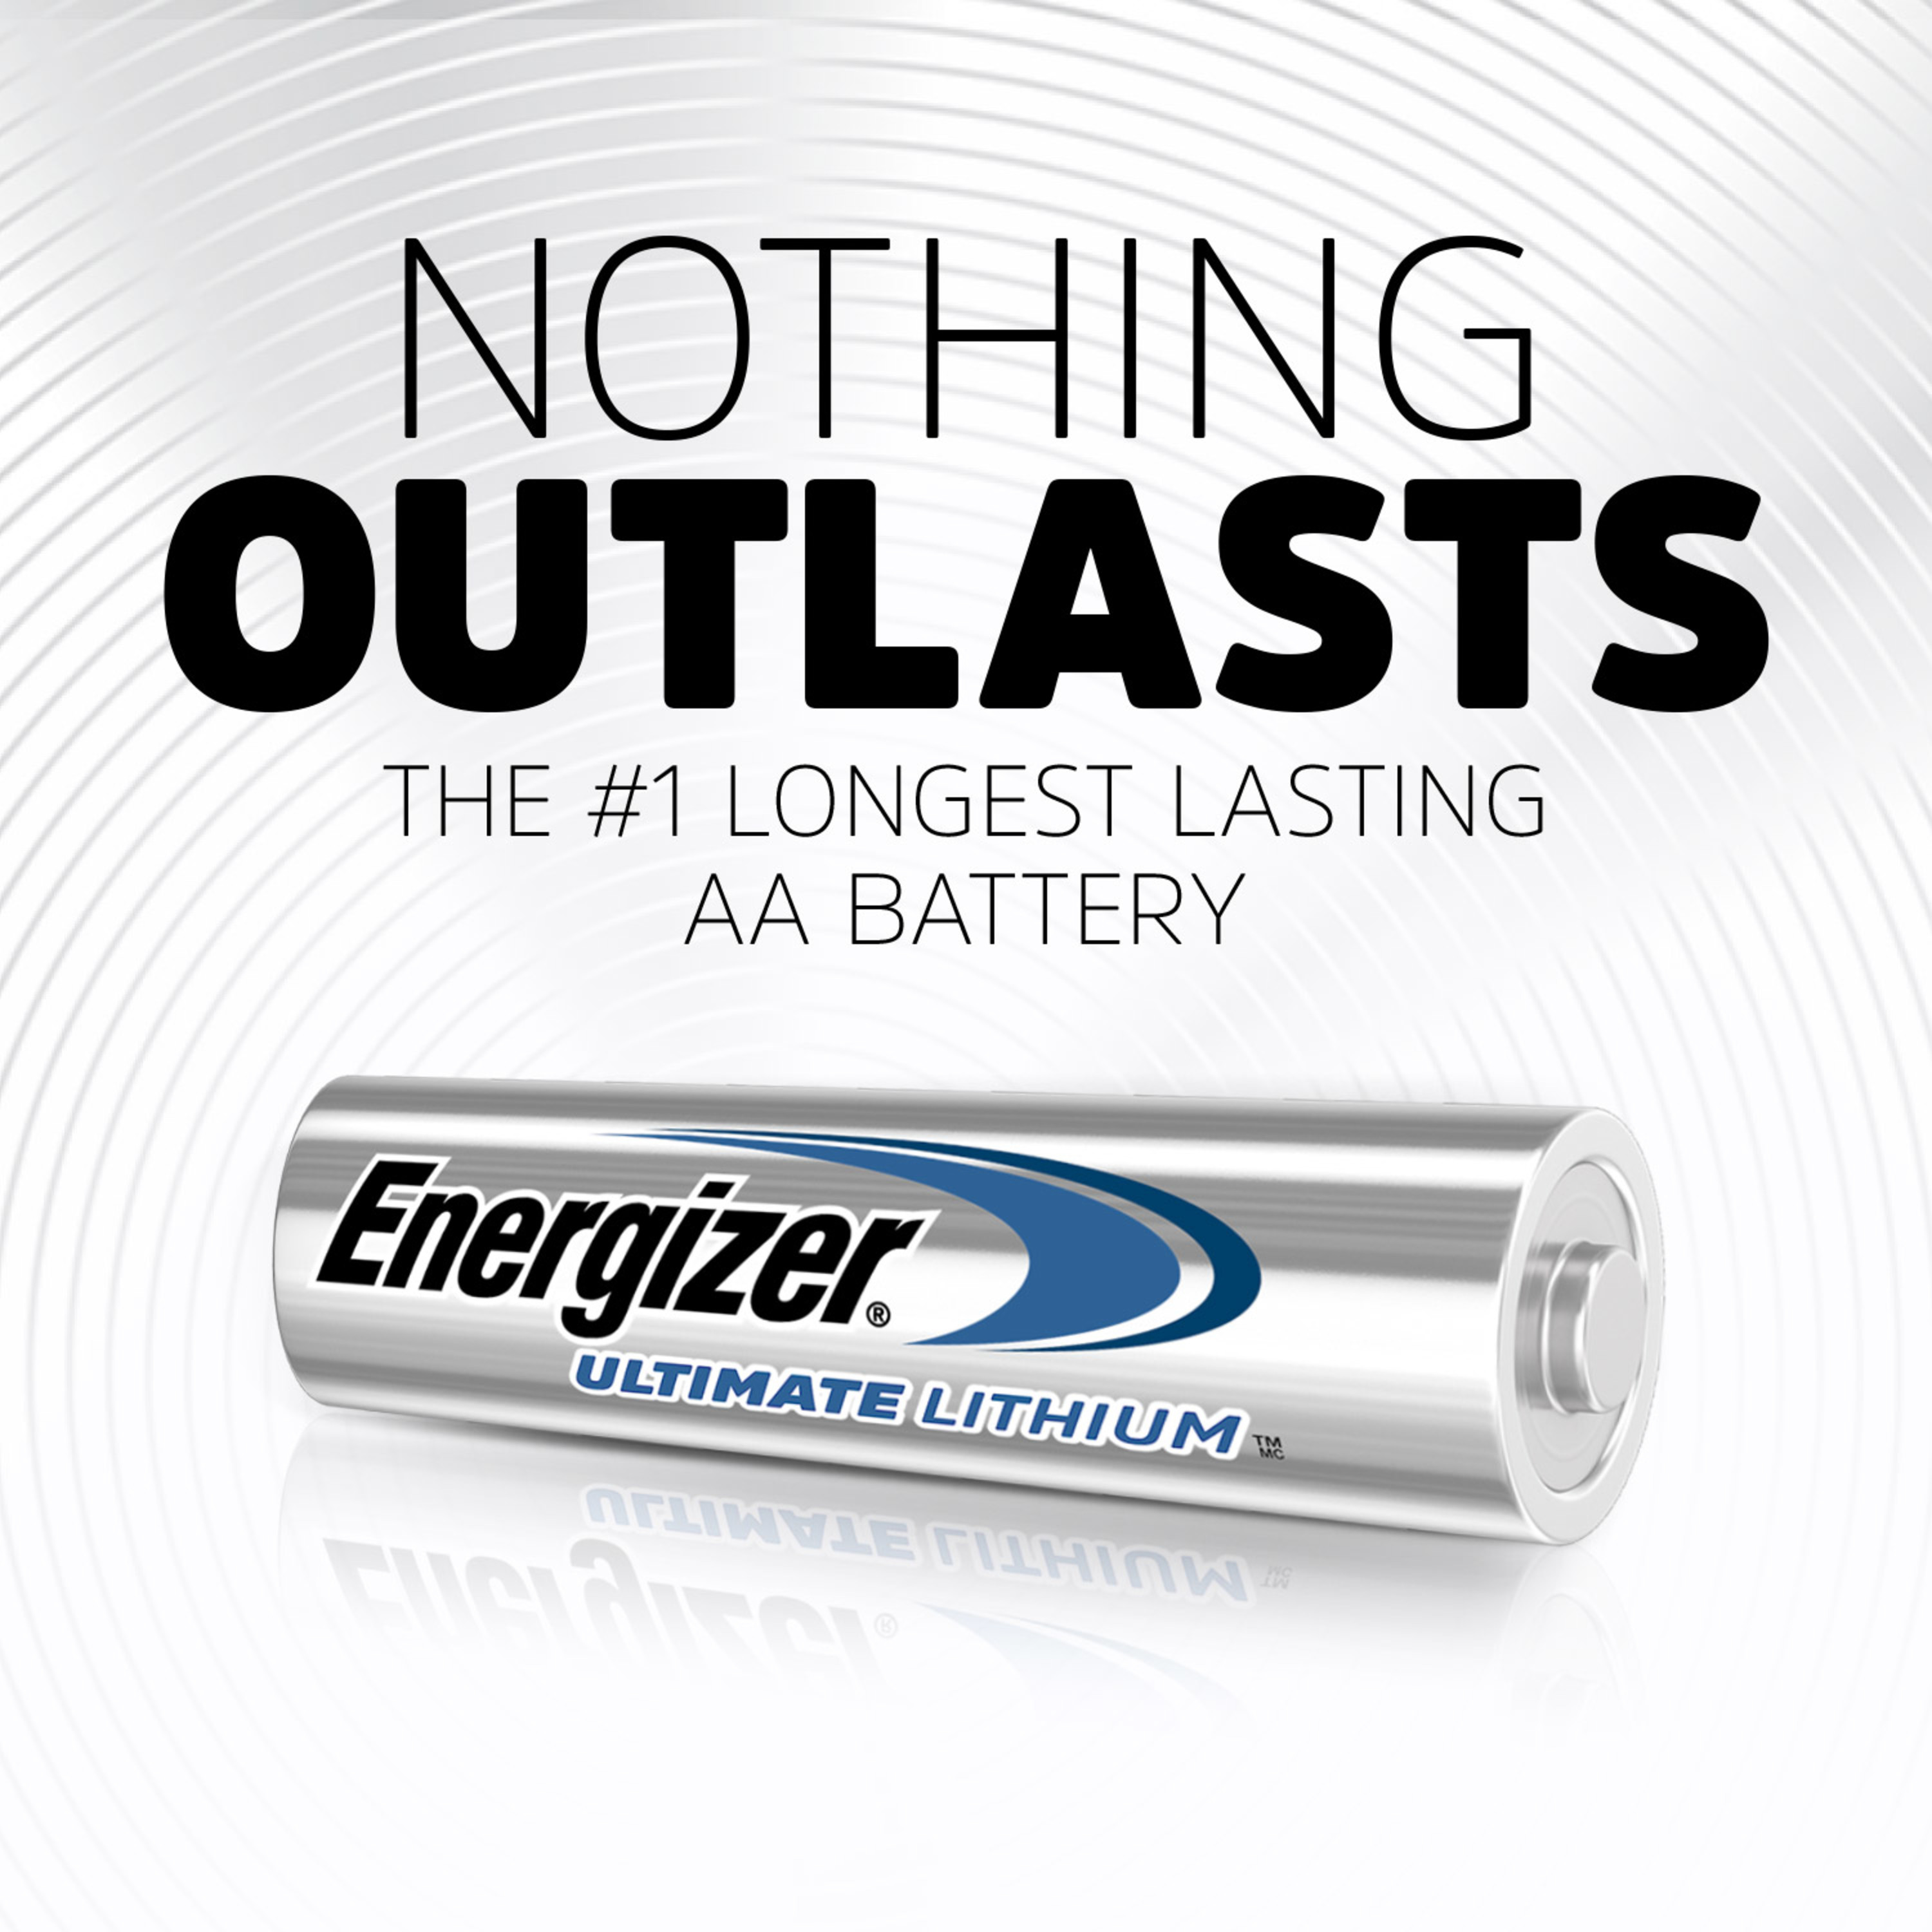 Energizer Ultimate Lithium AA Batteries (4 Pack), Double A Batteries - image 5 of 15